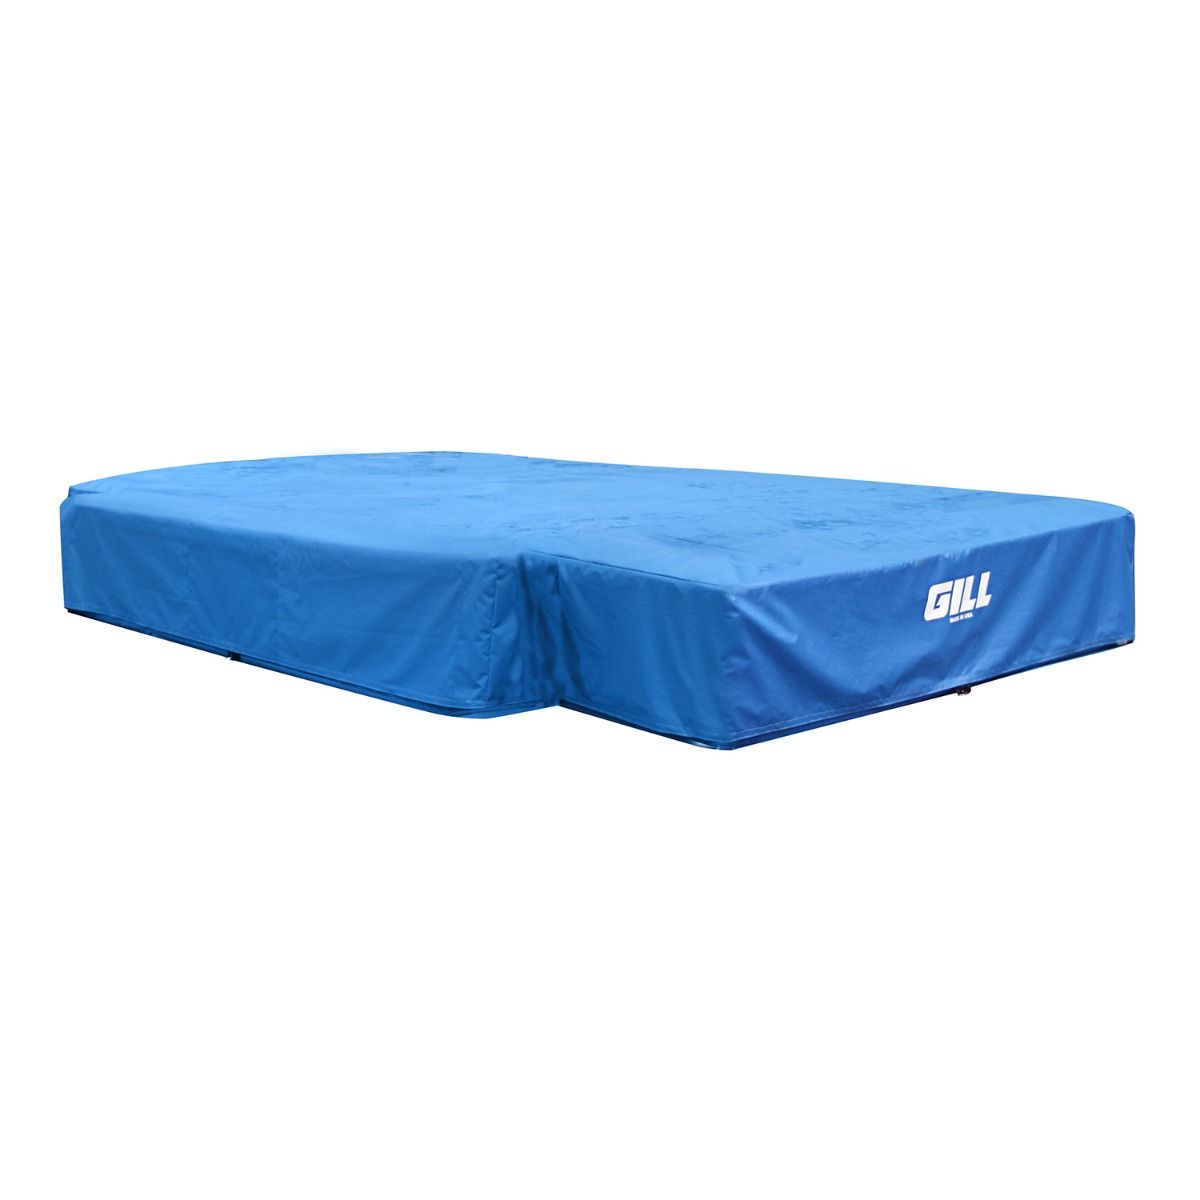 Gill Athletics S1 High Jump Weather Cover